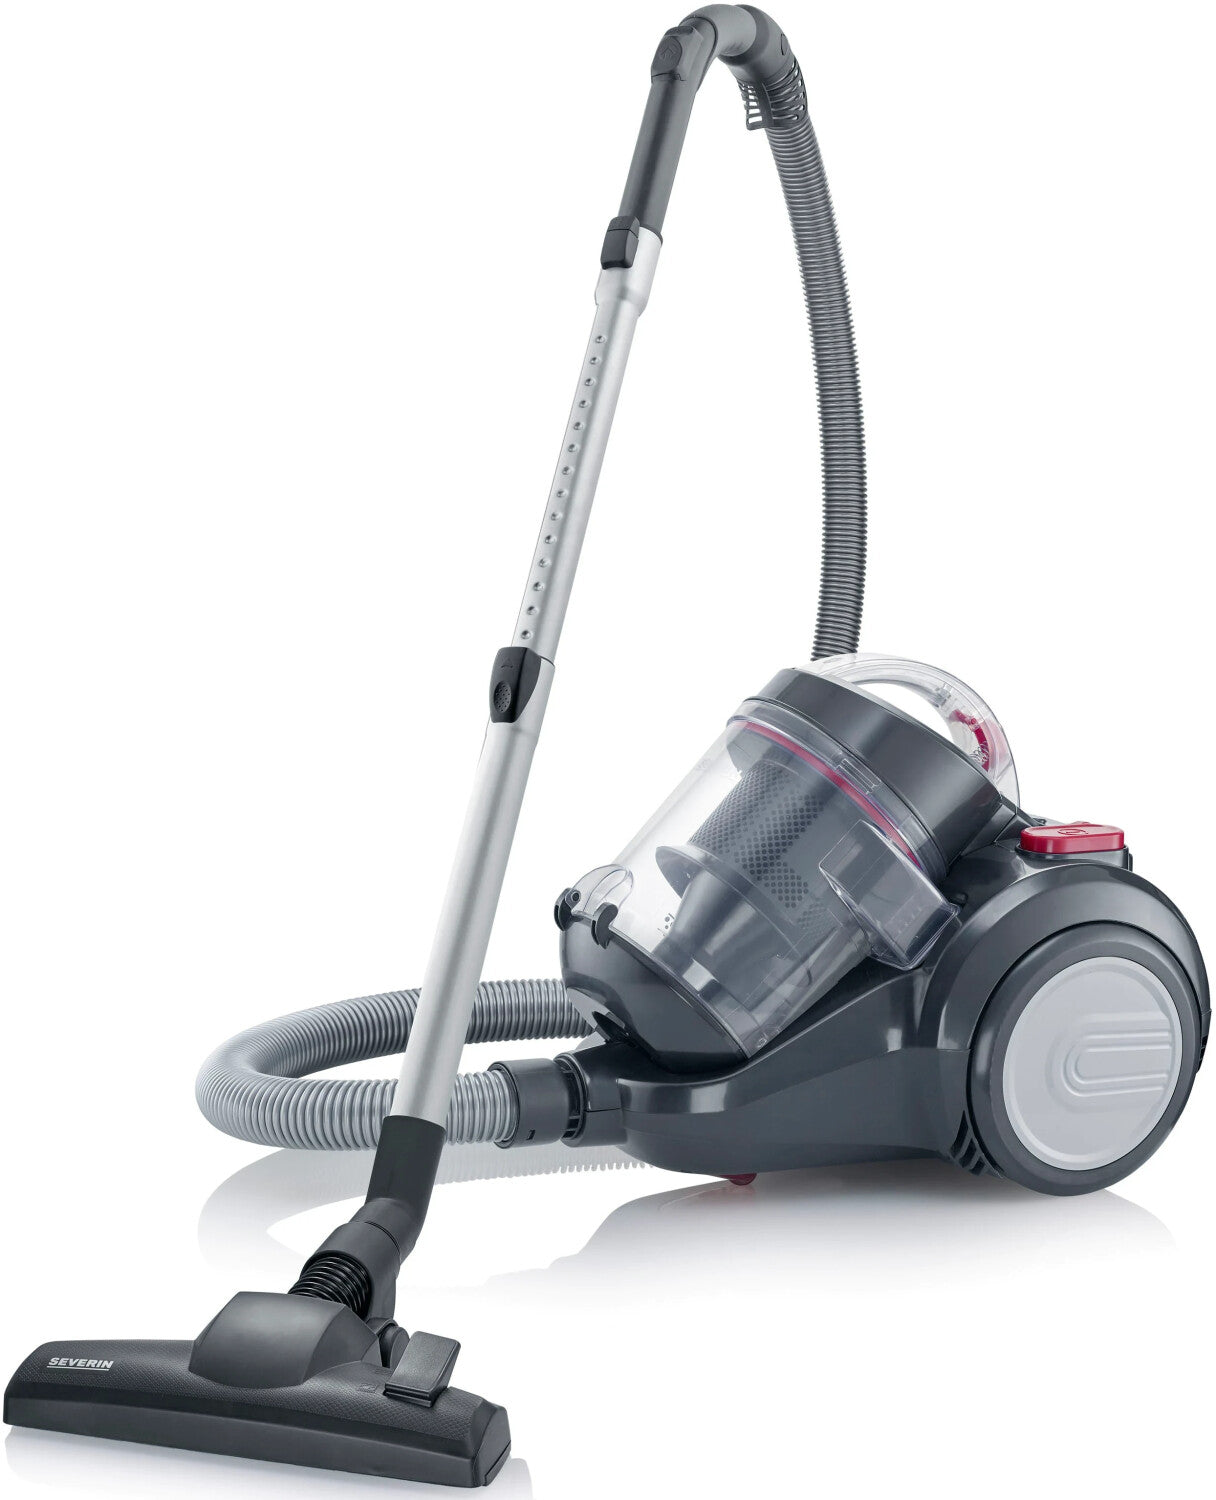 7089/7089-s / Severin Bagless Vacuum Cleaner Cyclone , 750w , adjustable power regulation, incl. par bagless / SILVER